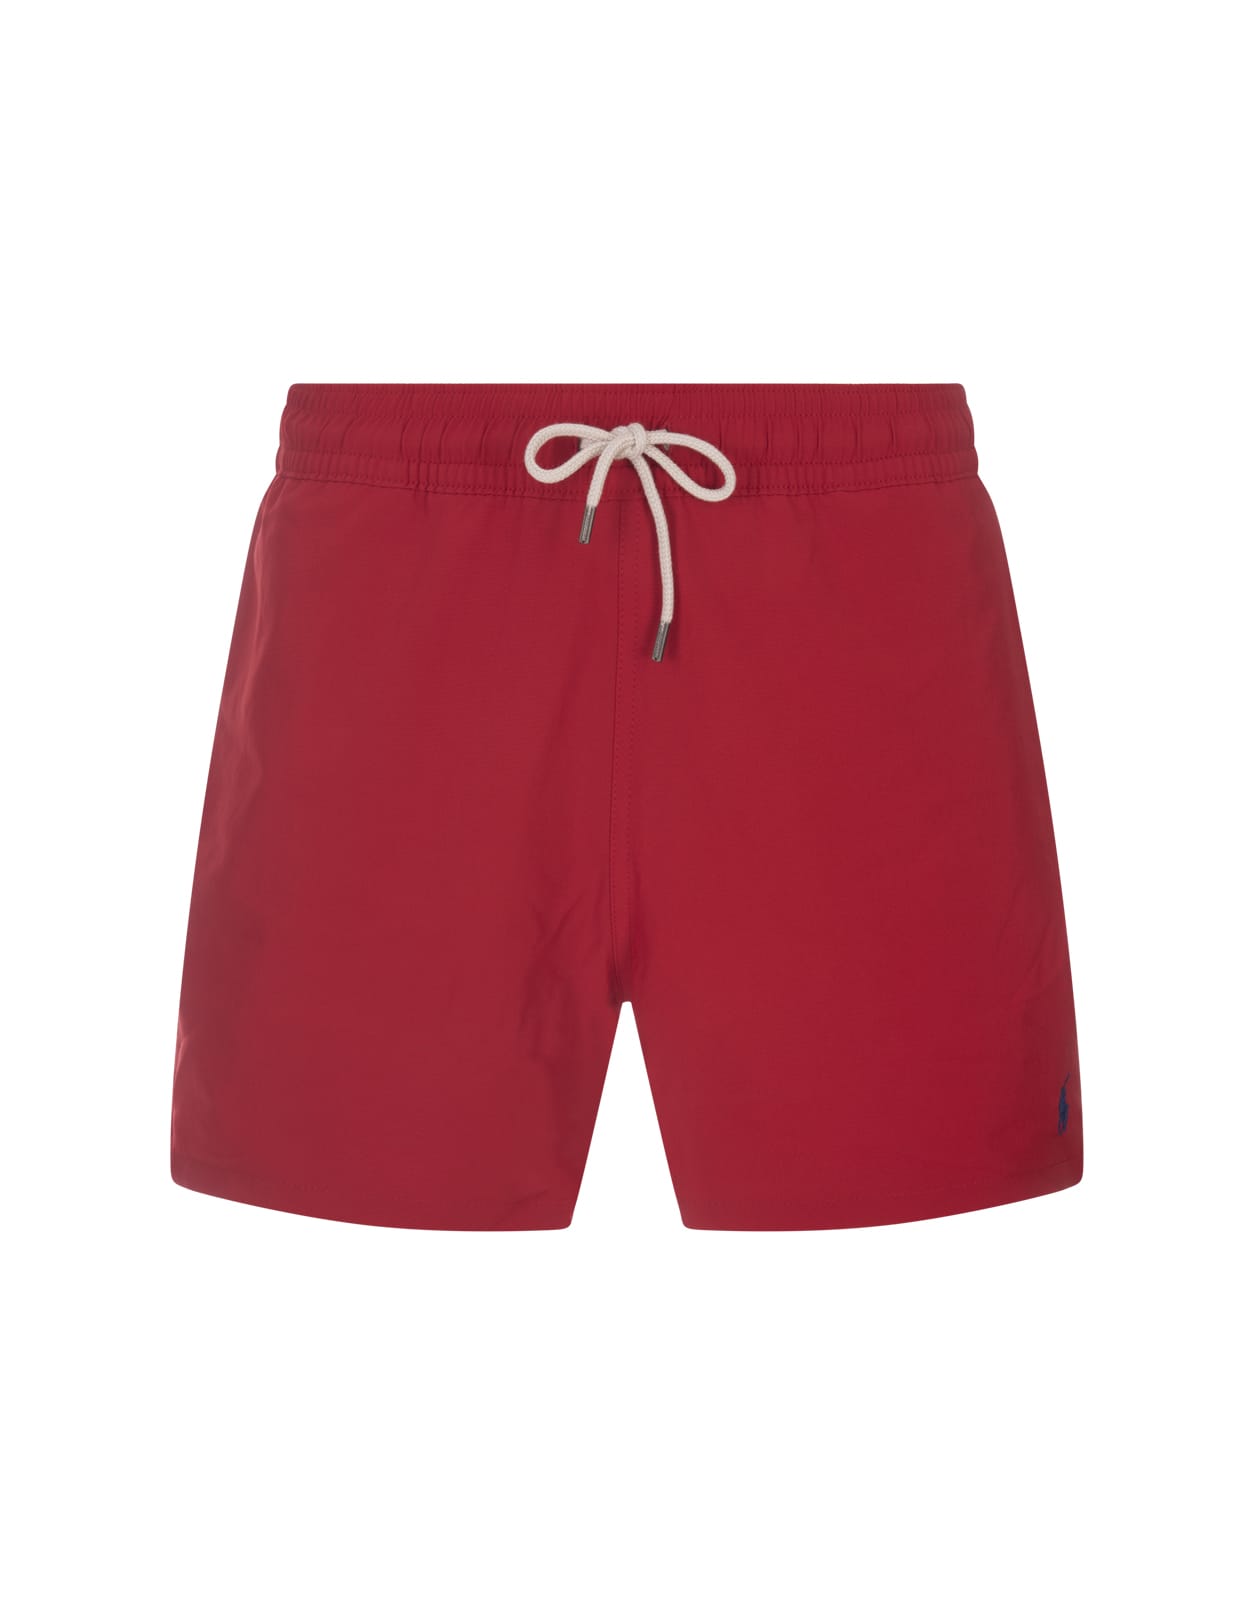 Red Swim Shorts With Embroidered Pony